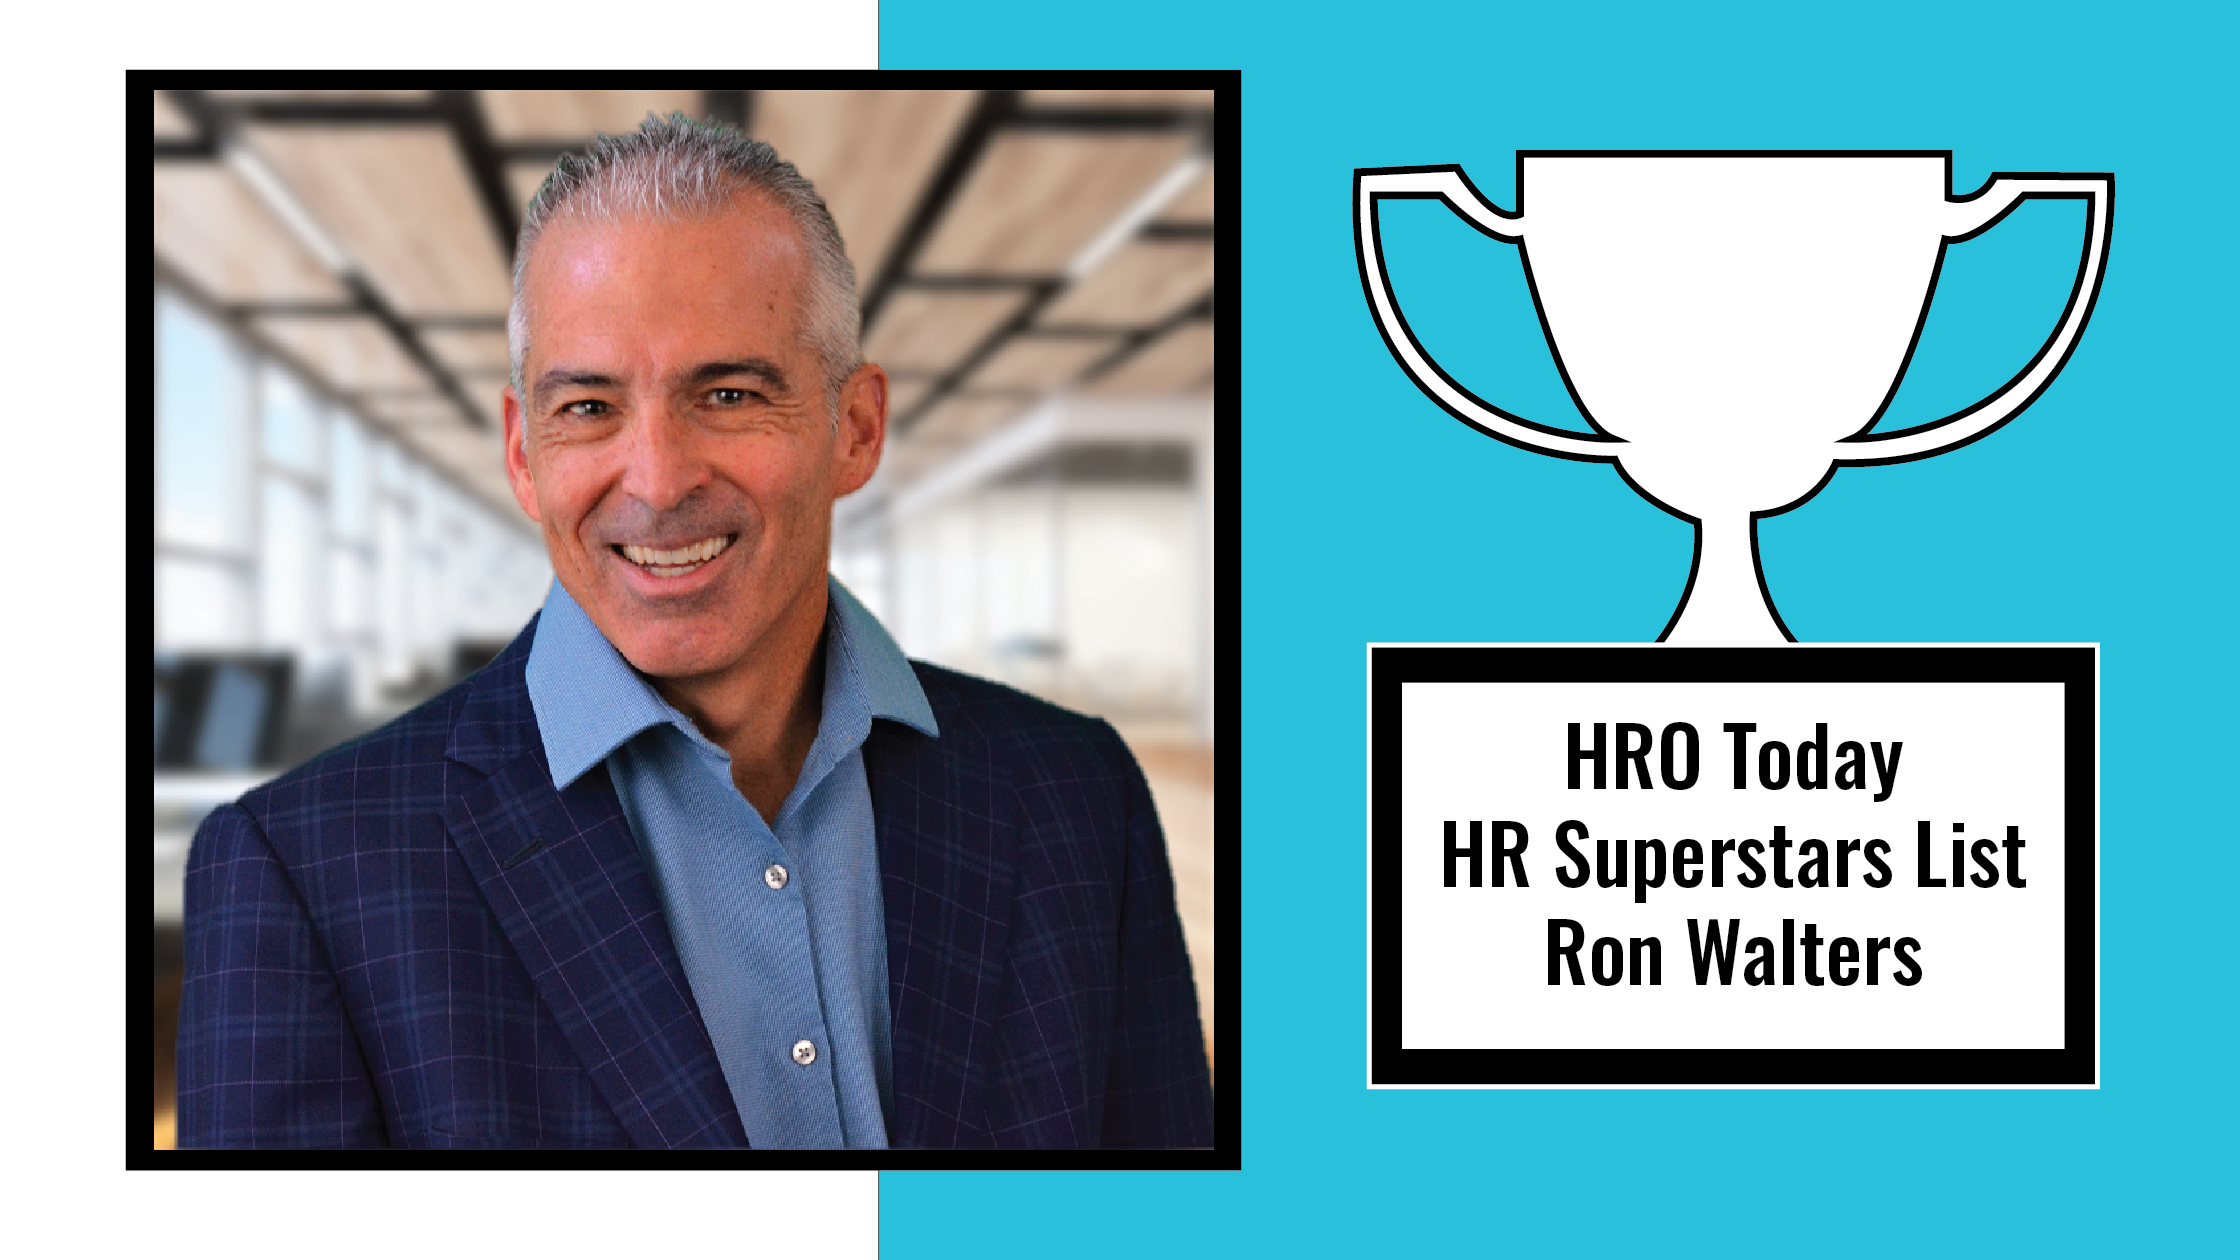 HRO Today HR Superstars List Includes endevis RPO Leader Ron Walters